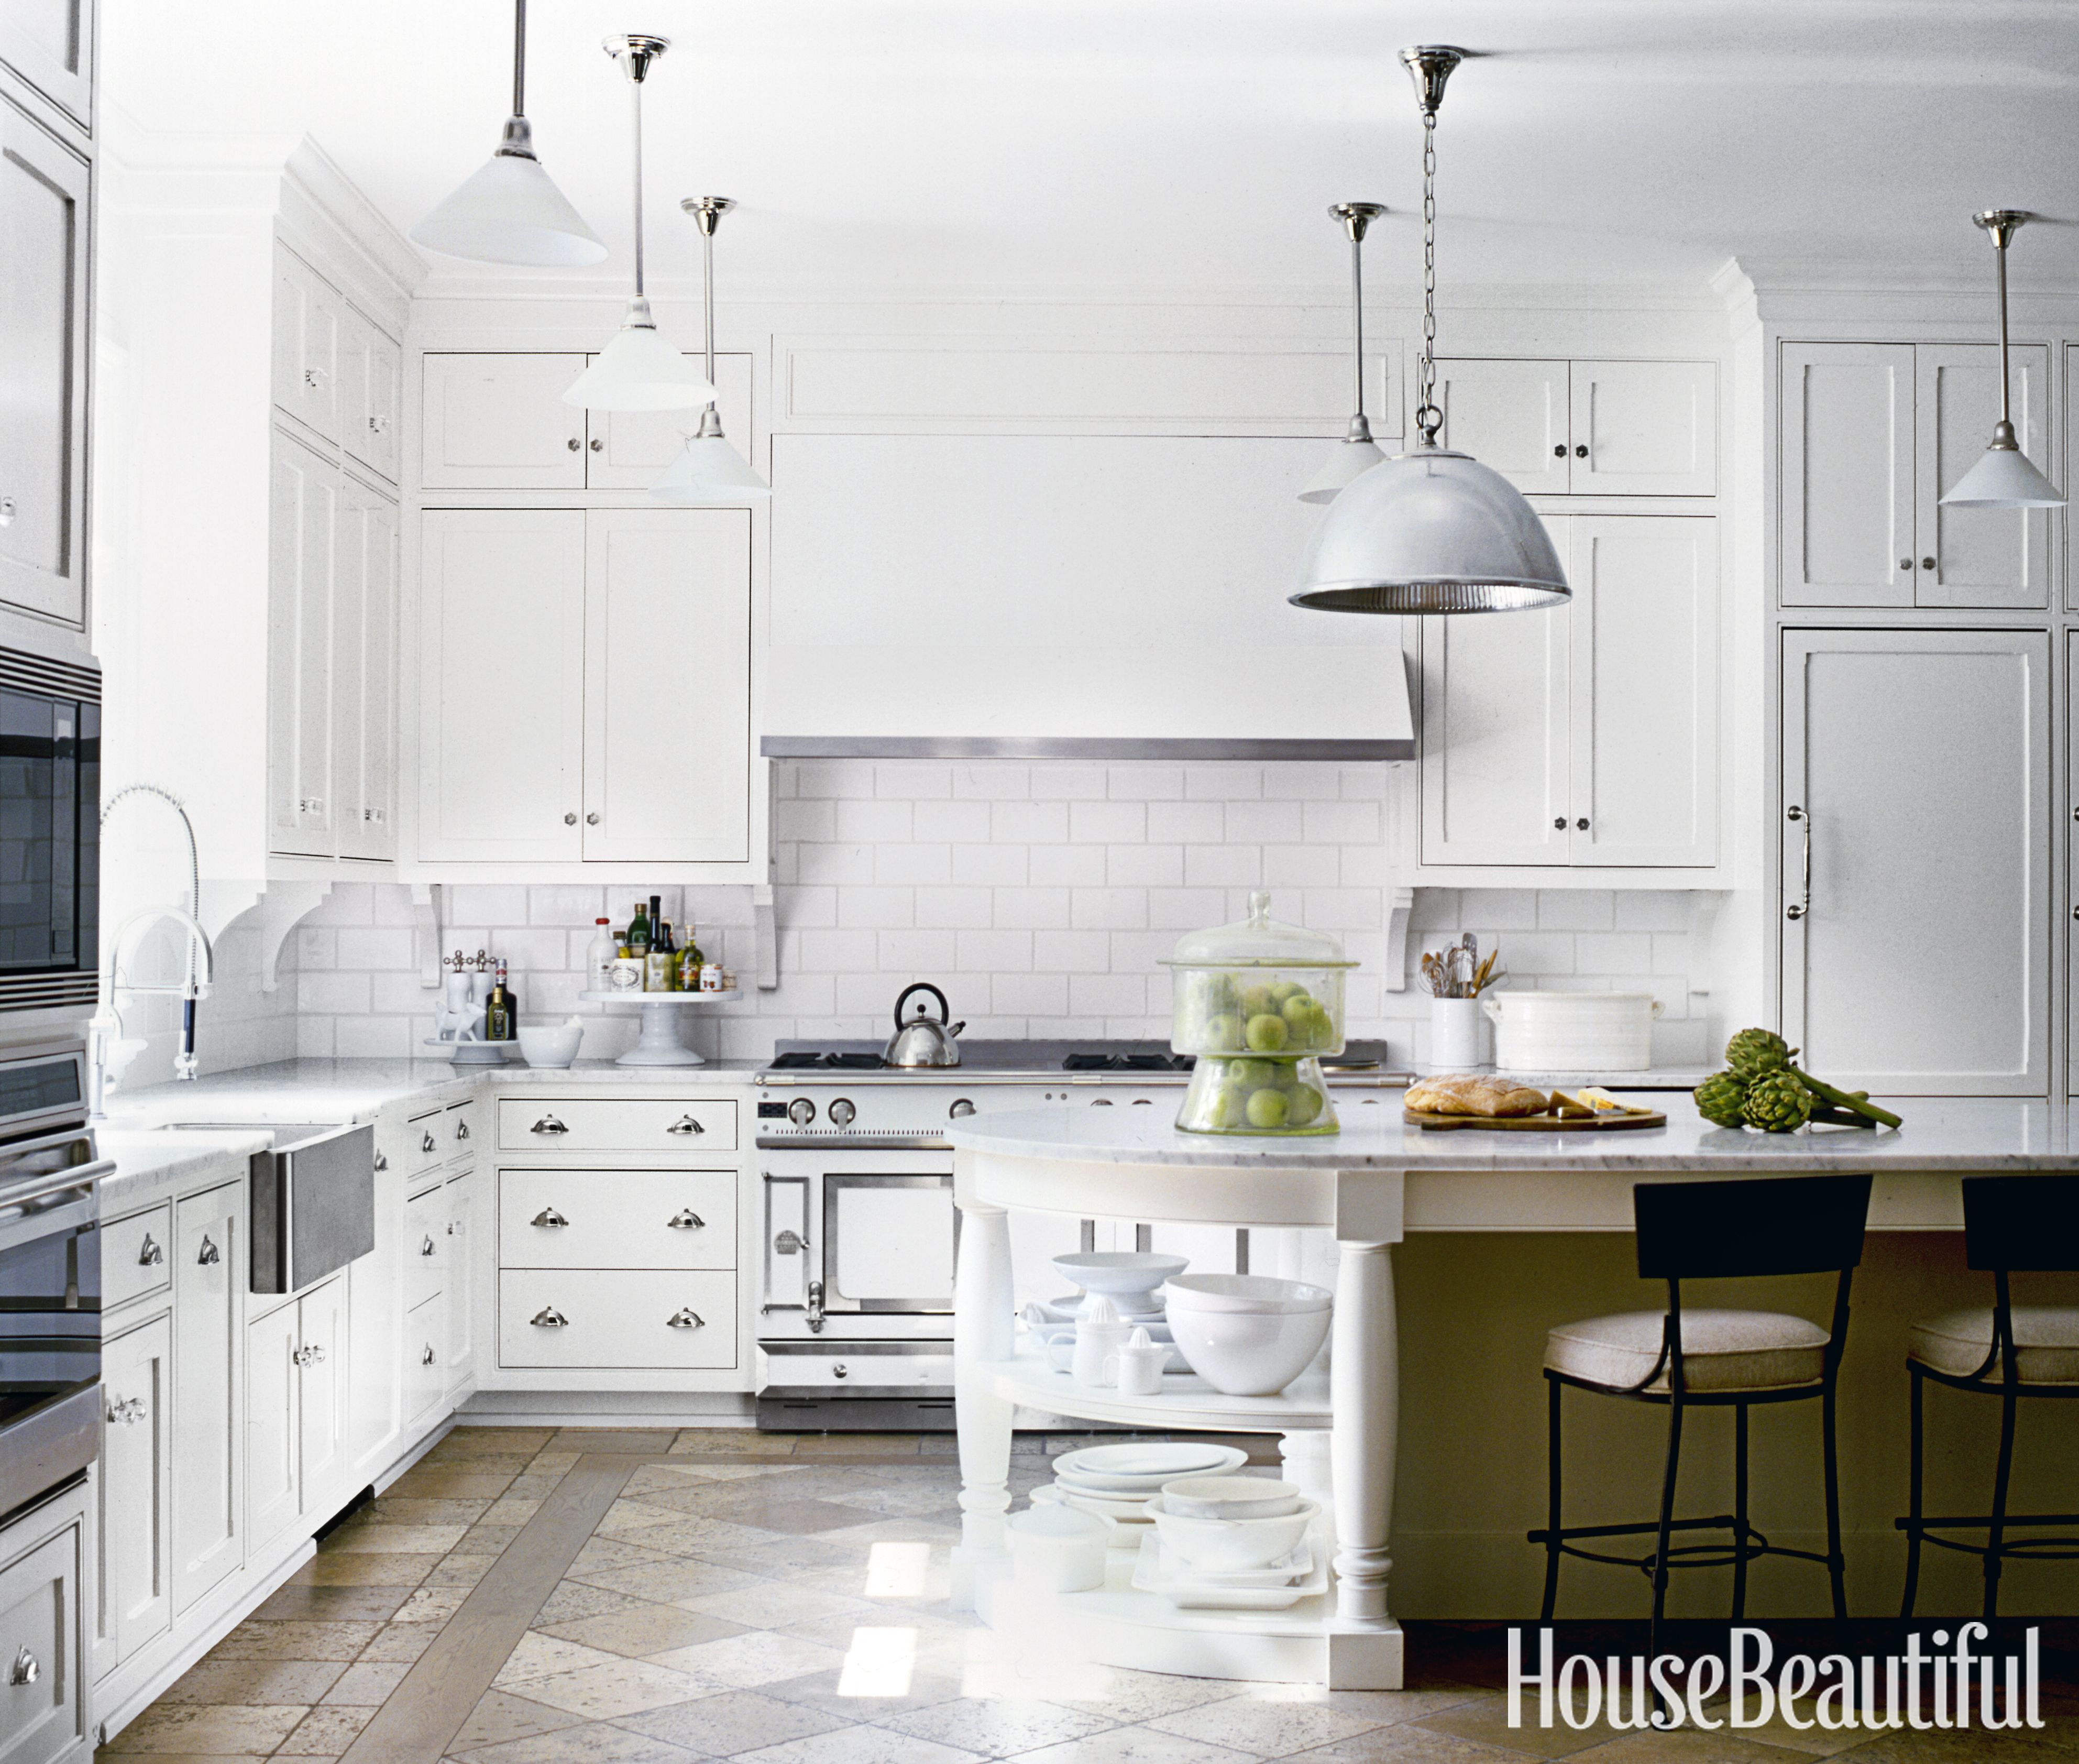 How To Make Your Kitchen Look Expensive, How To Make Flat Kitchen Cabinets Look Good